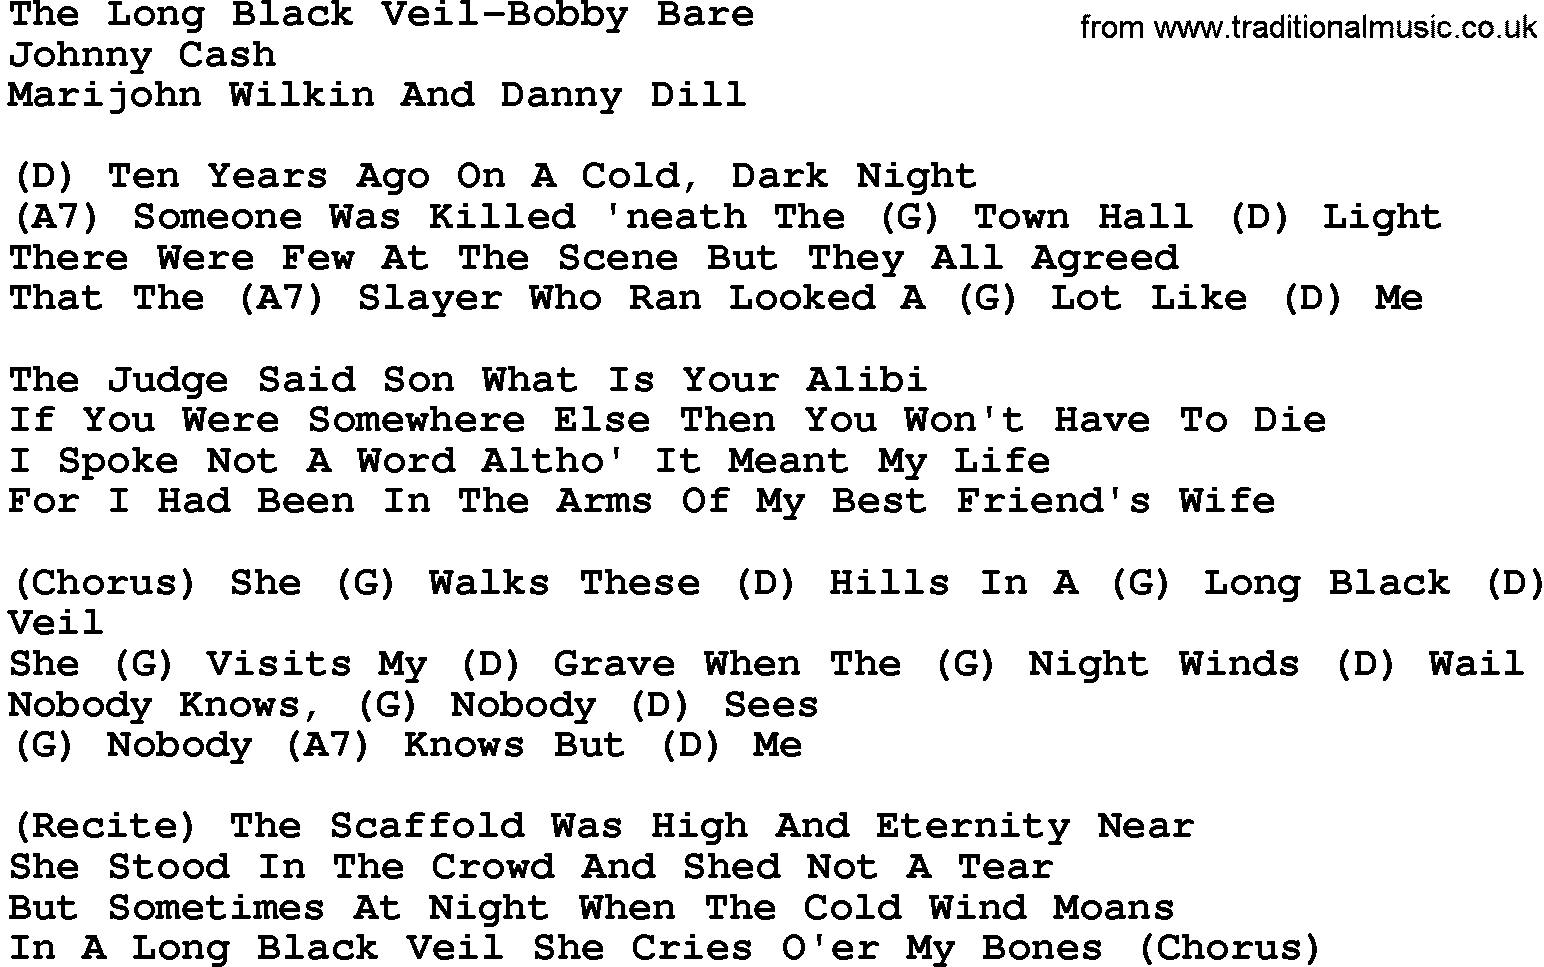 Country music song: The Long Black Veil-Bobby Bare lyrics and chords